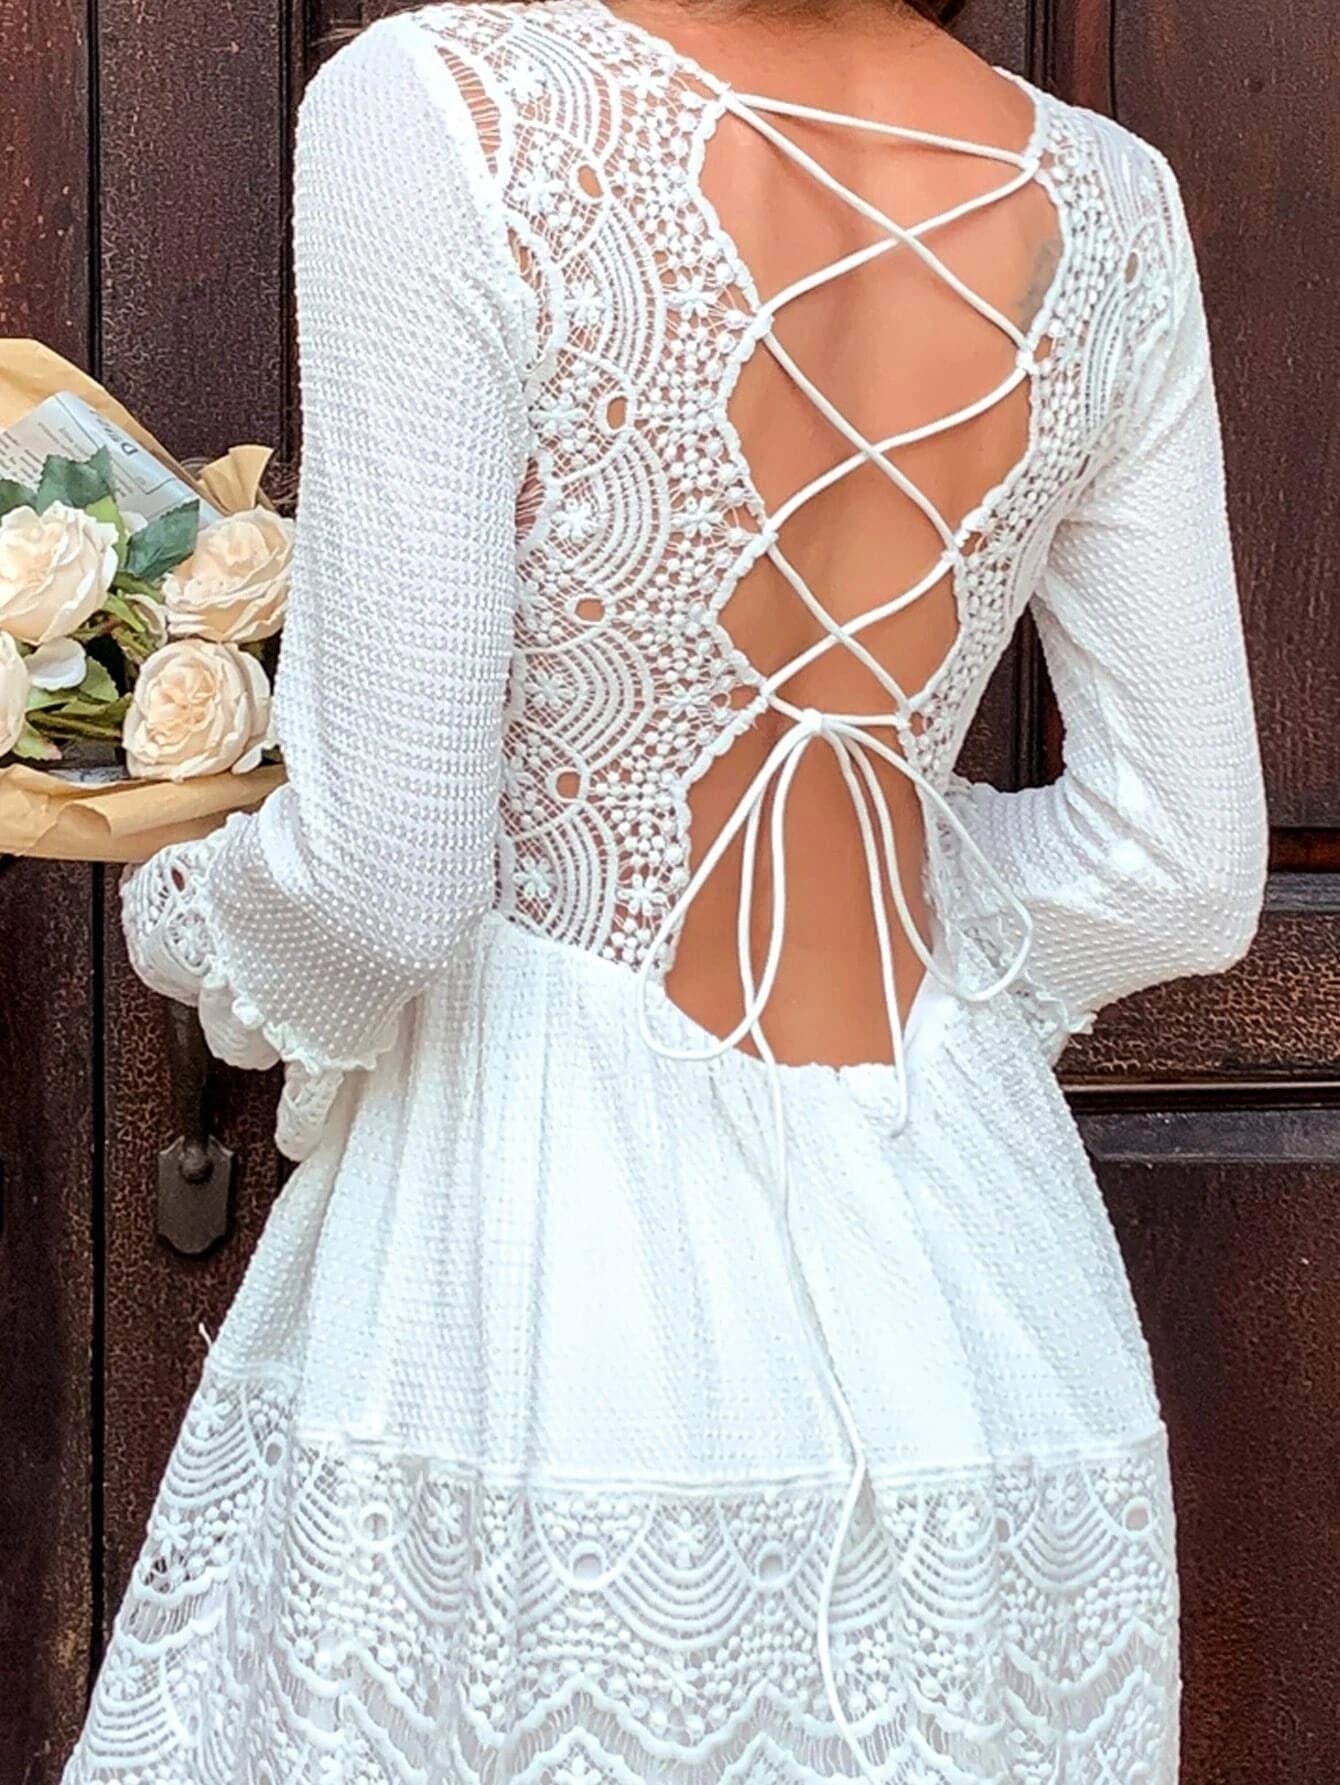 MISSORD Elegant Sexy Lace Flare Sleeve Backless Dress FT8251 MISS ORD